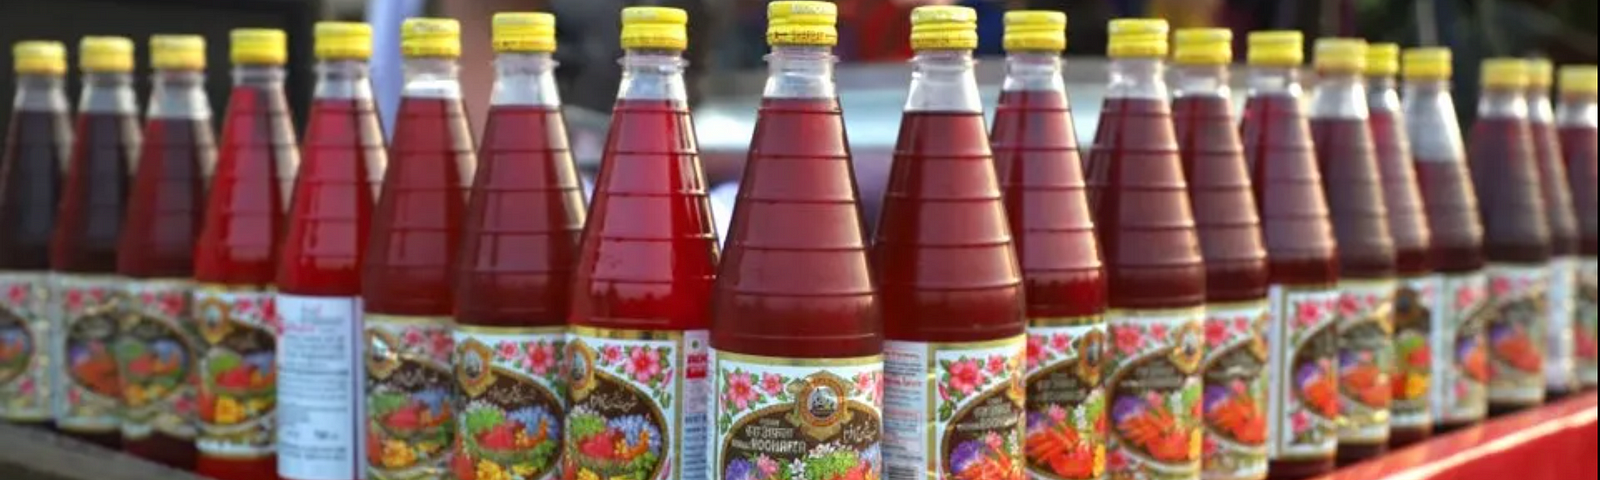 Bottles of Rooh Afza stacked on a roadside trolley. Credits: CNTraveller